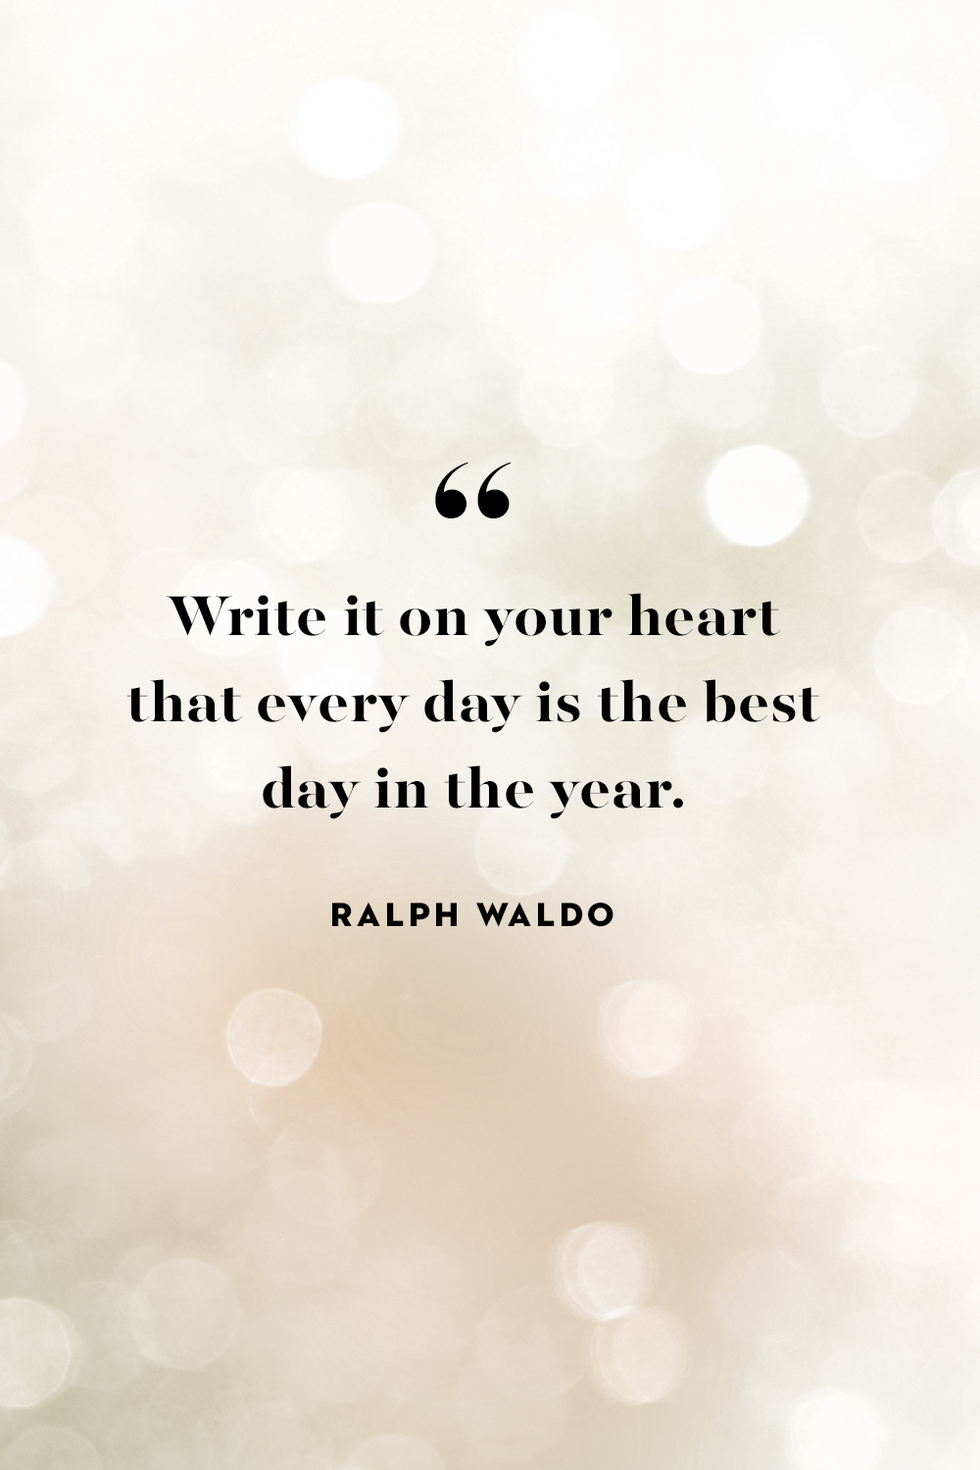 new year quote by ralph waldo emerson